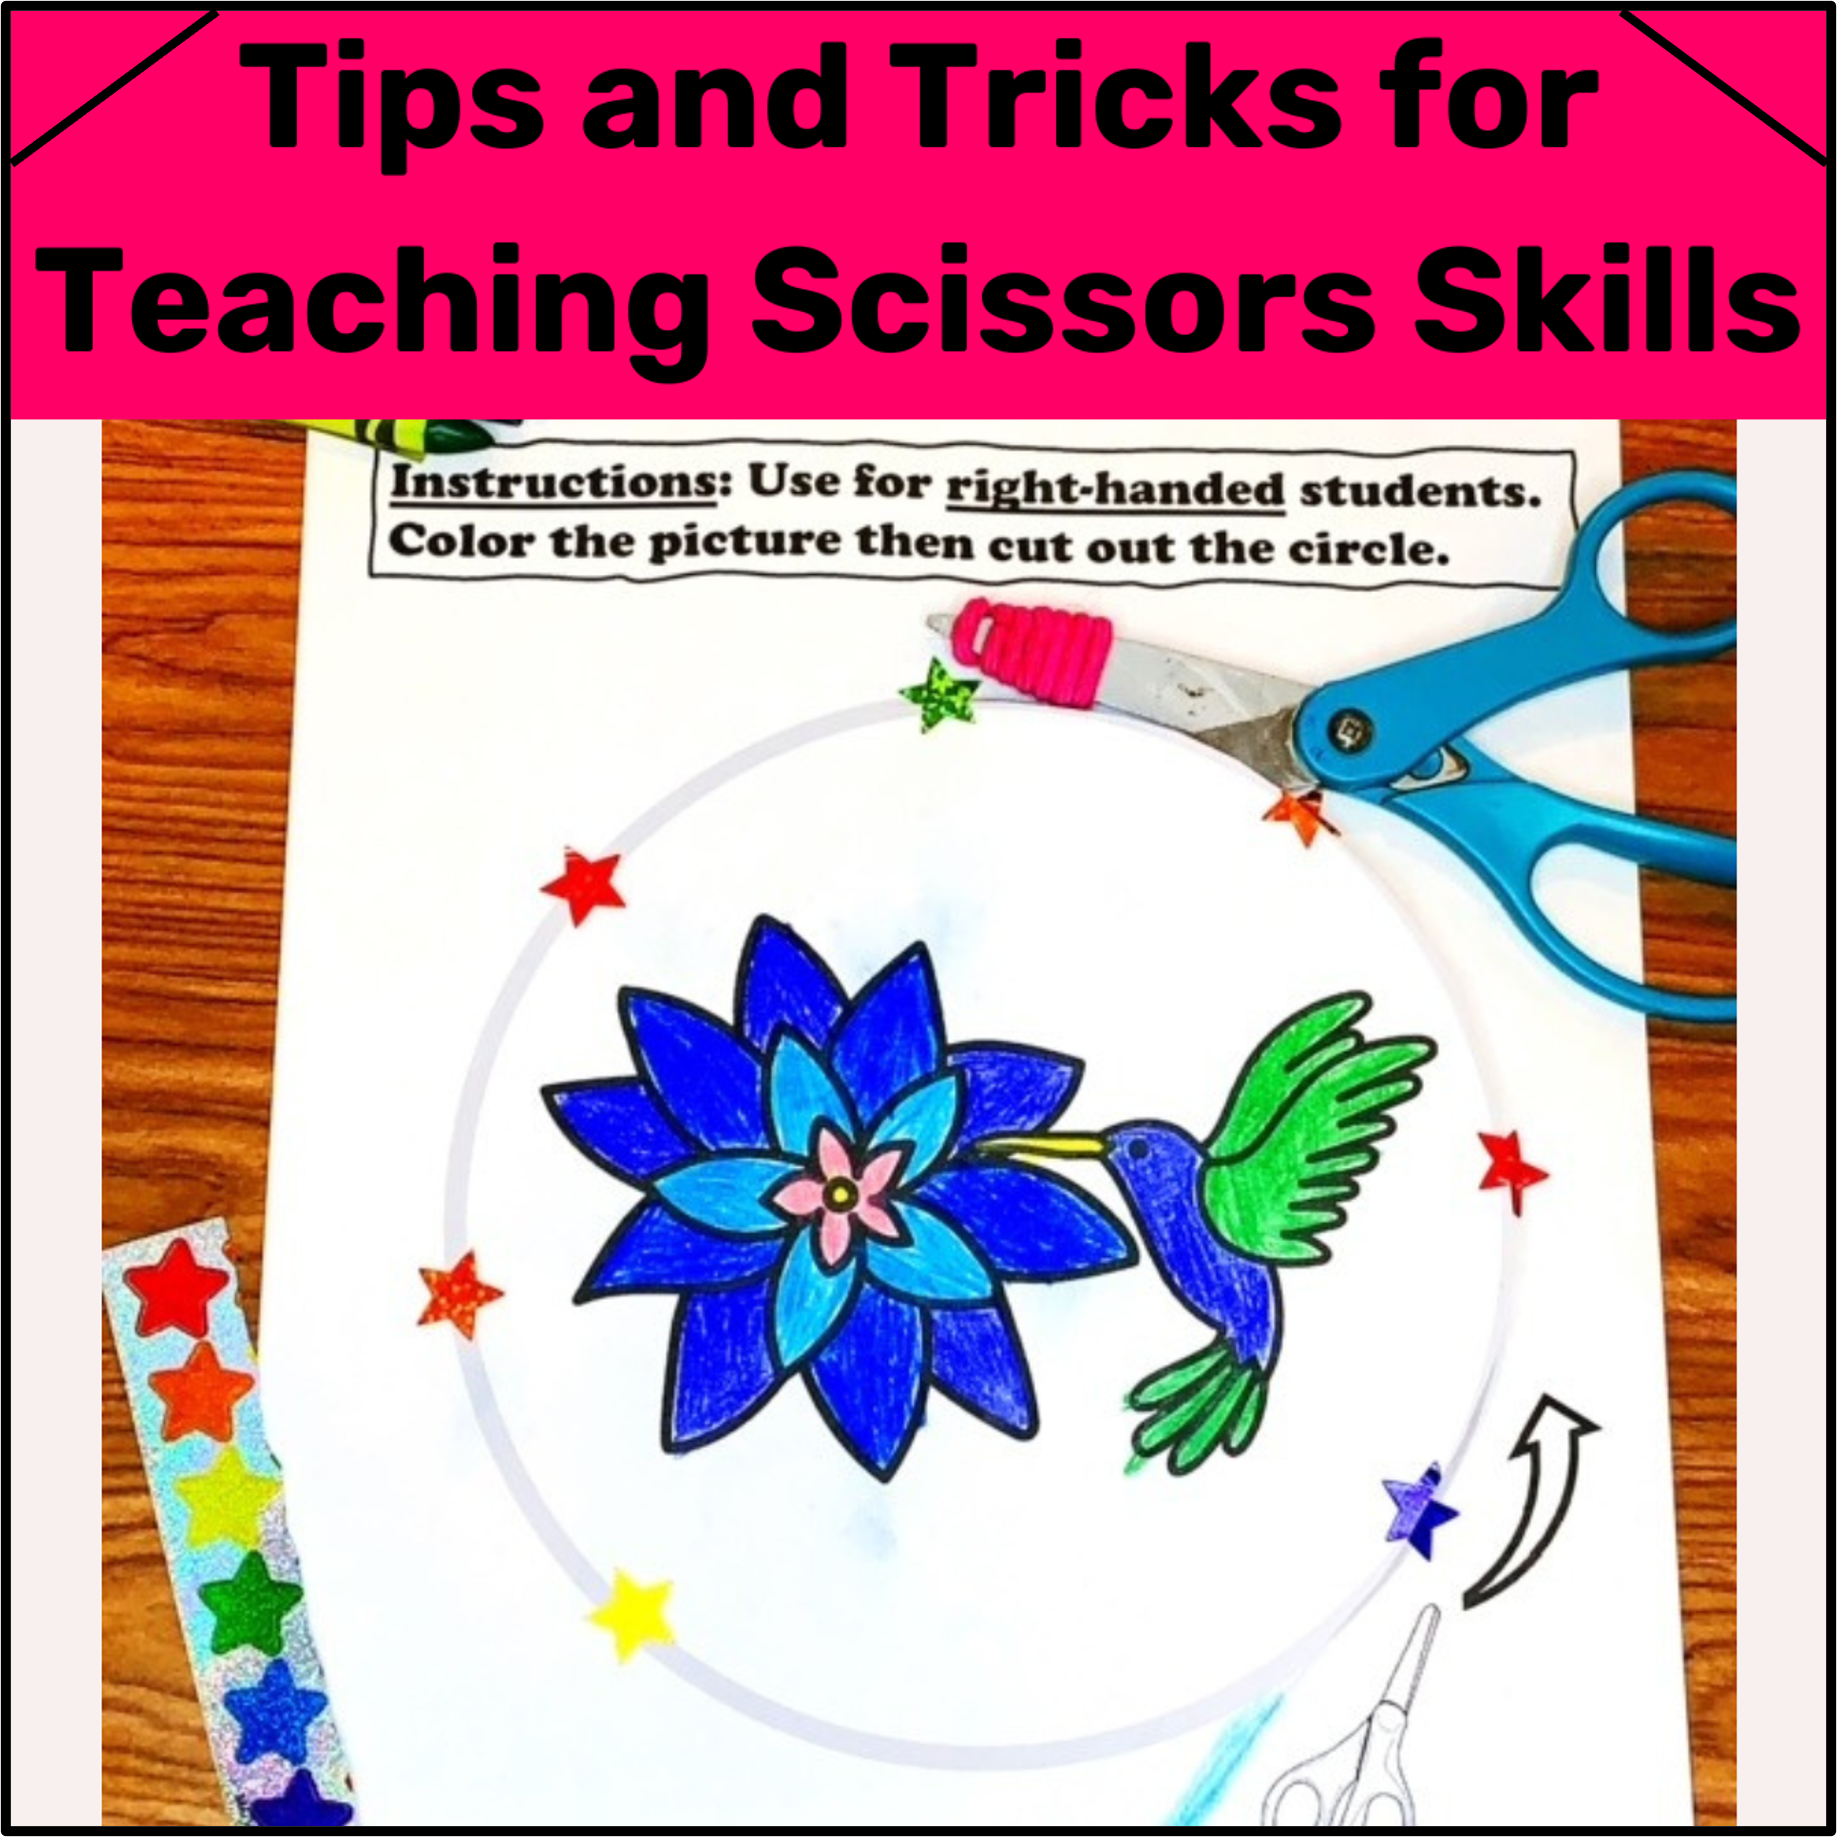 Scissor Skills: How And When To Introduce Scissors